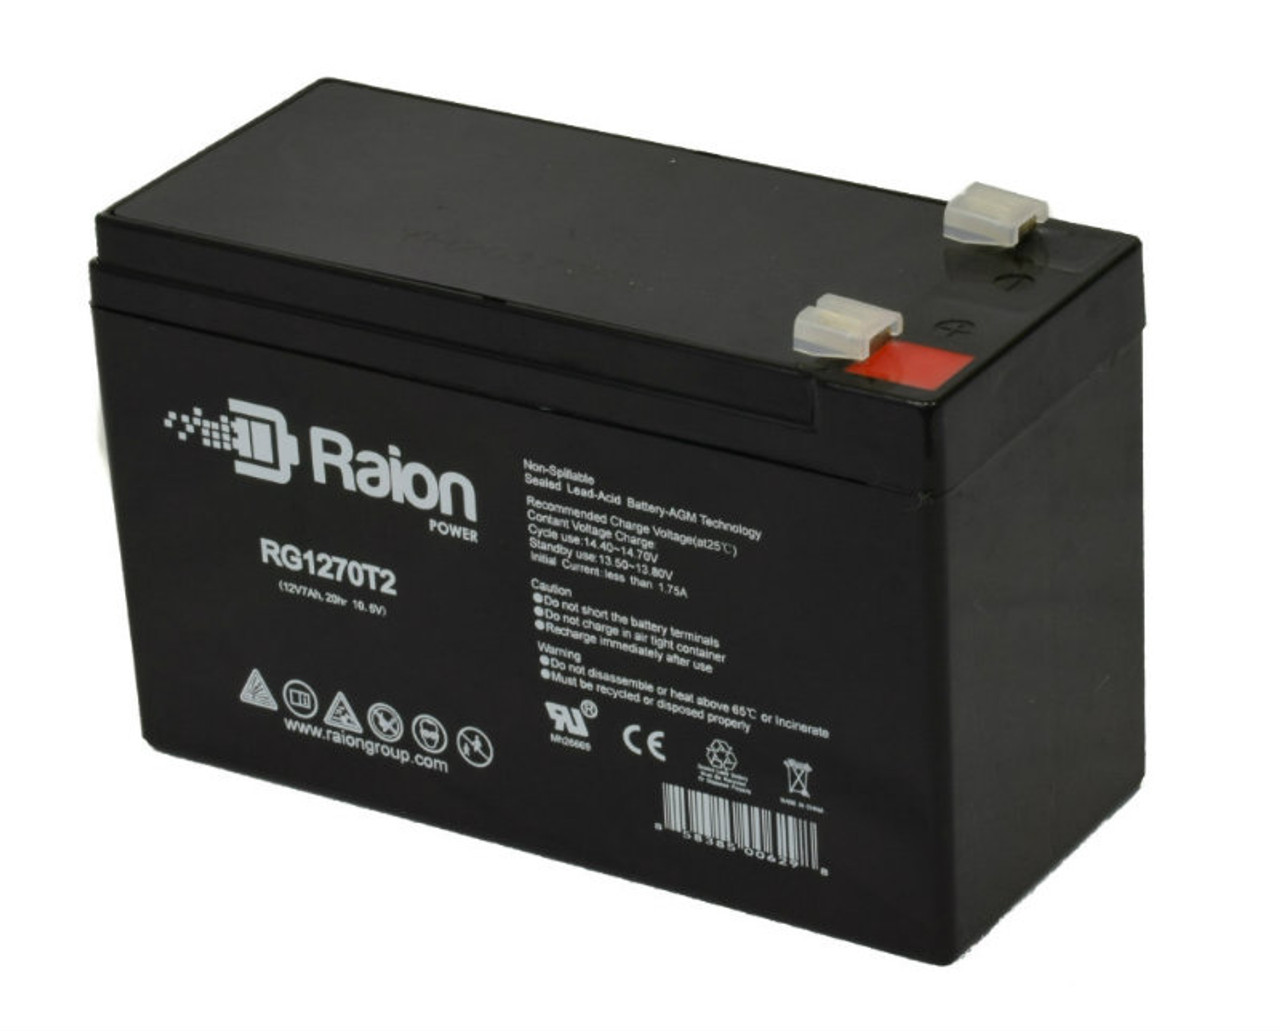 Raion Power RG1270T2 12V 7Ah Lead Acid Battery for Uber Scoot ES04 300W Electric Powerboard